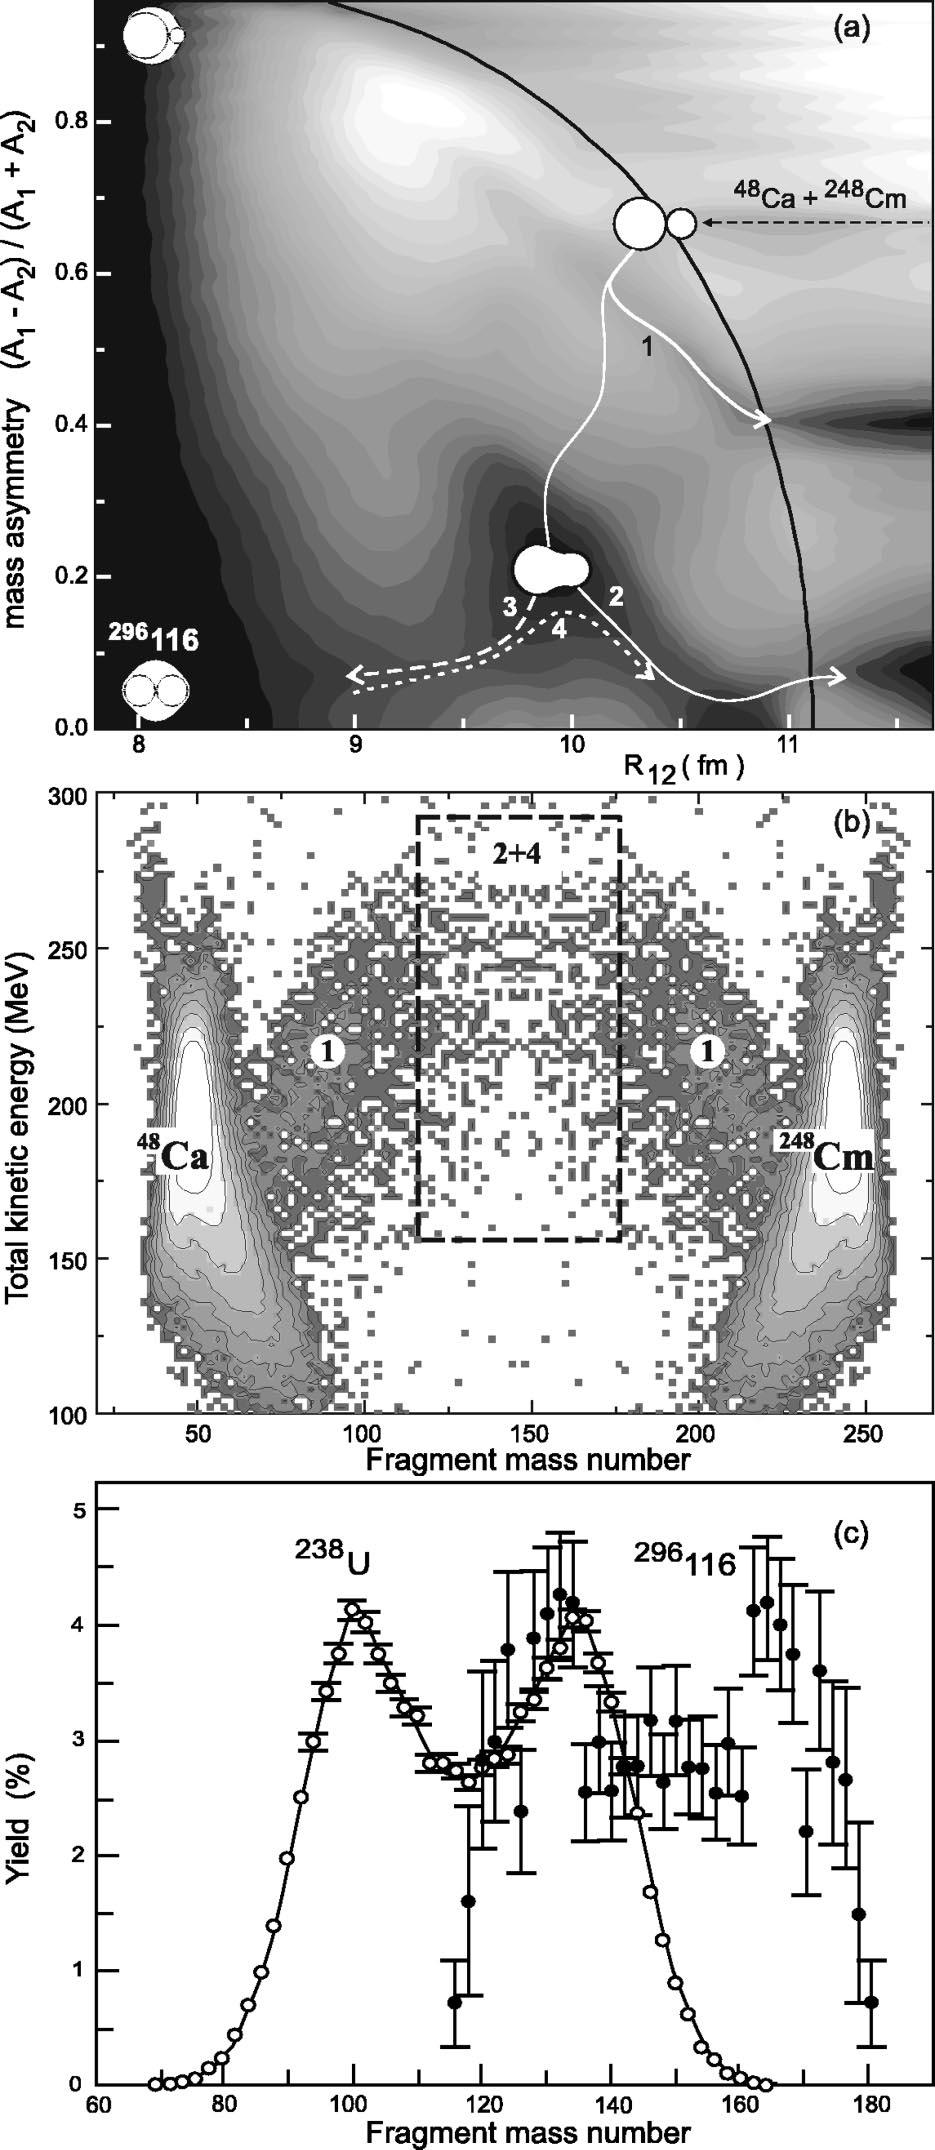 FISSION BARRIERS OF SUPERHEAVY NUCLEI PHYSICAL REVIEW C 65 044602 FIG. 5. a Driving potential as a function of mass asymmetry and distance between centers of two nuclei with zero deformations 14.